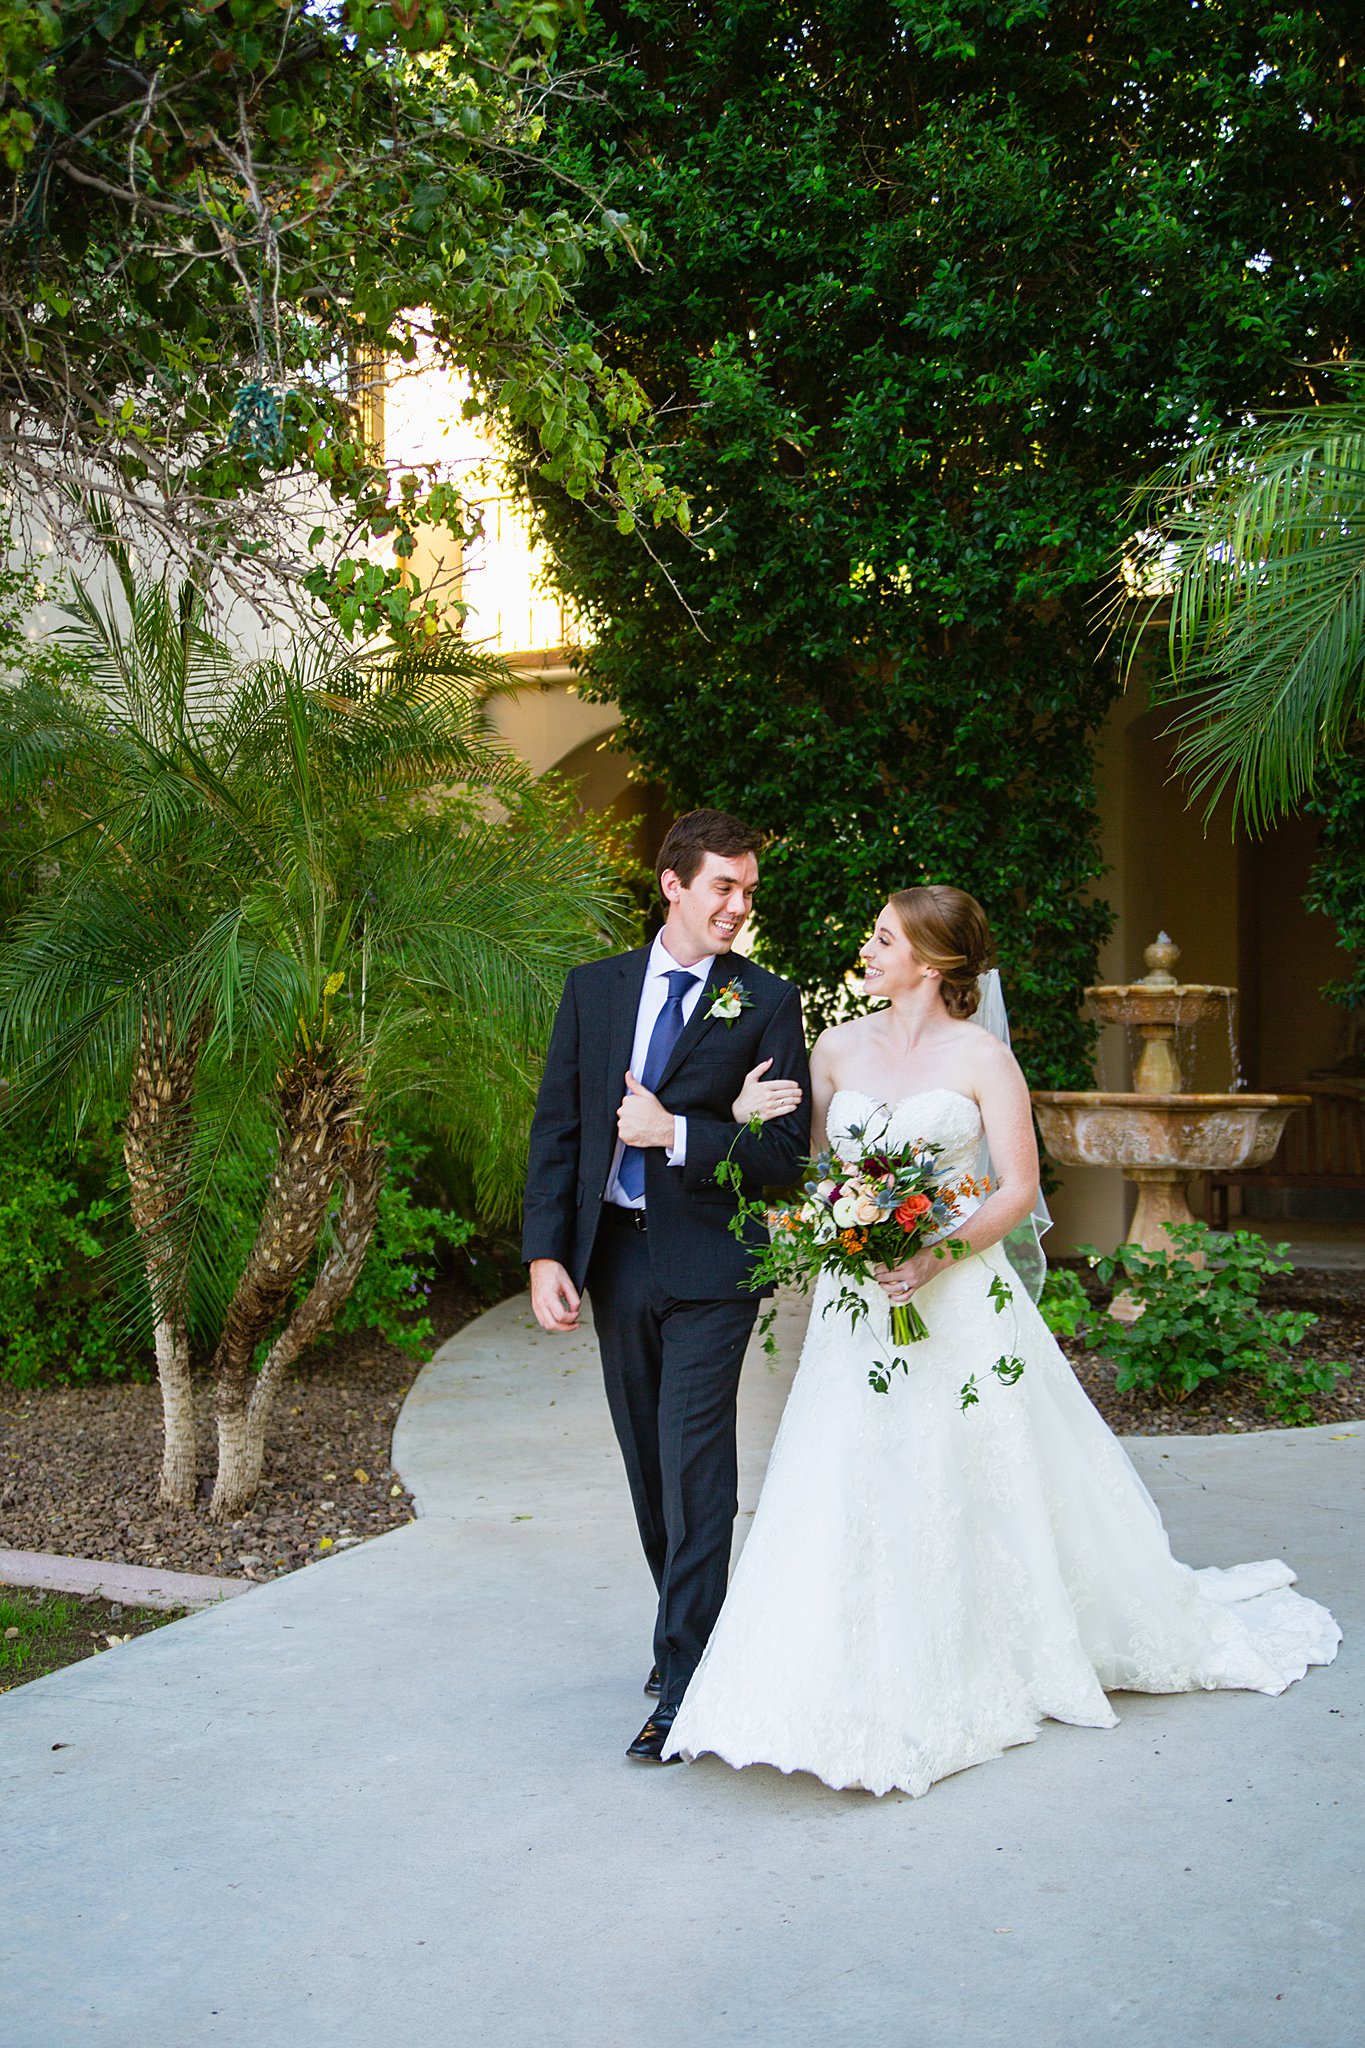 Bride and Groom walking together during their Secret Garden Events wedding by Arizona wedding photographer PMA Photography.